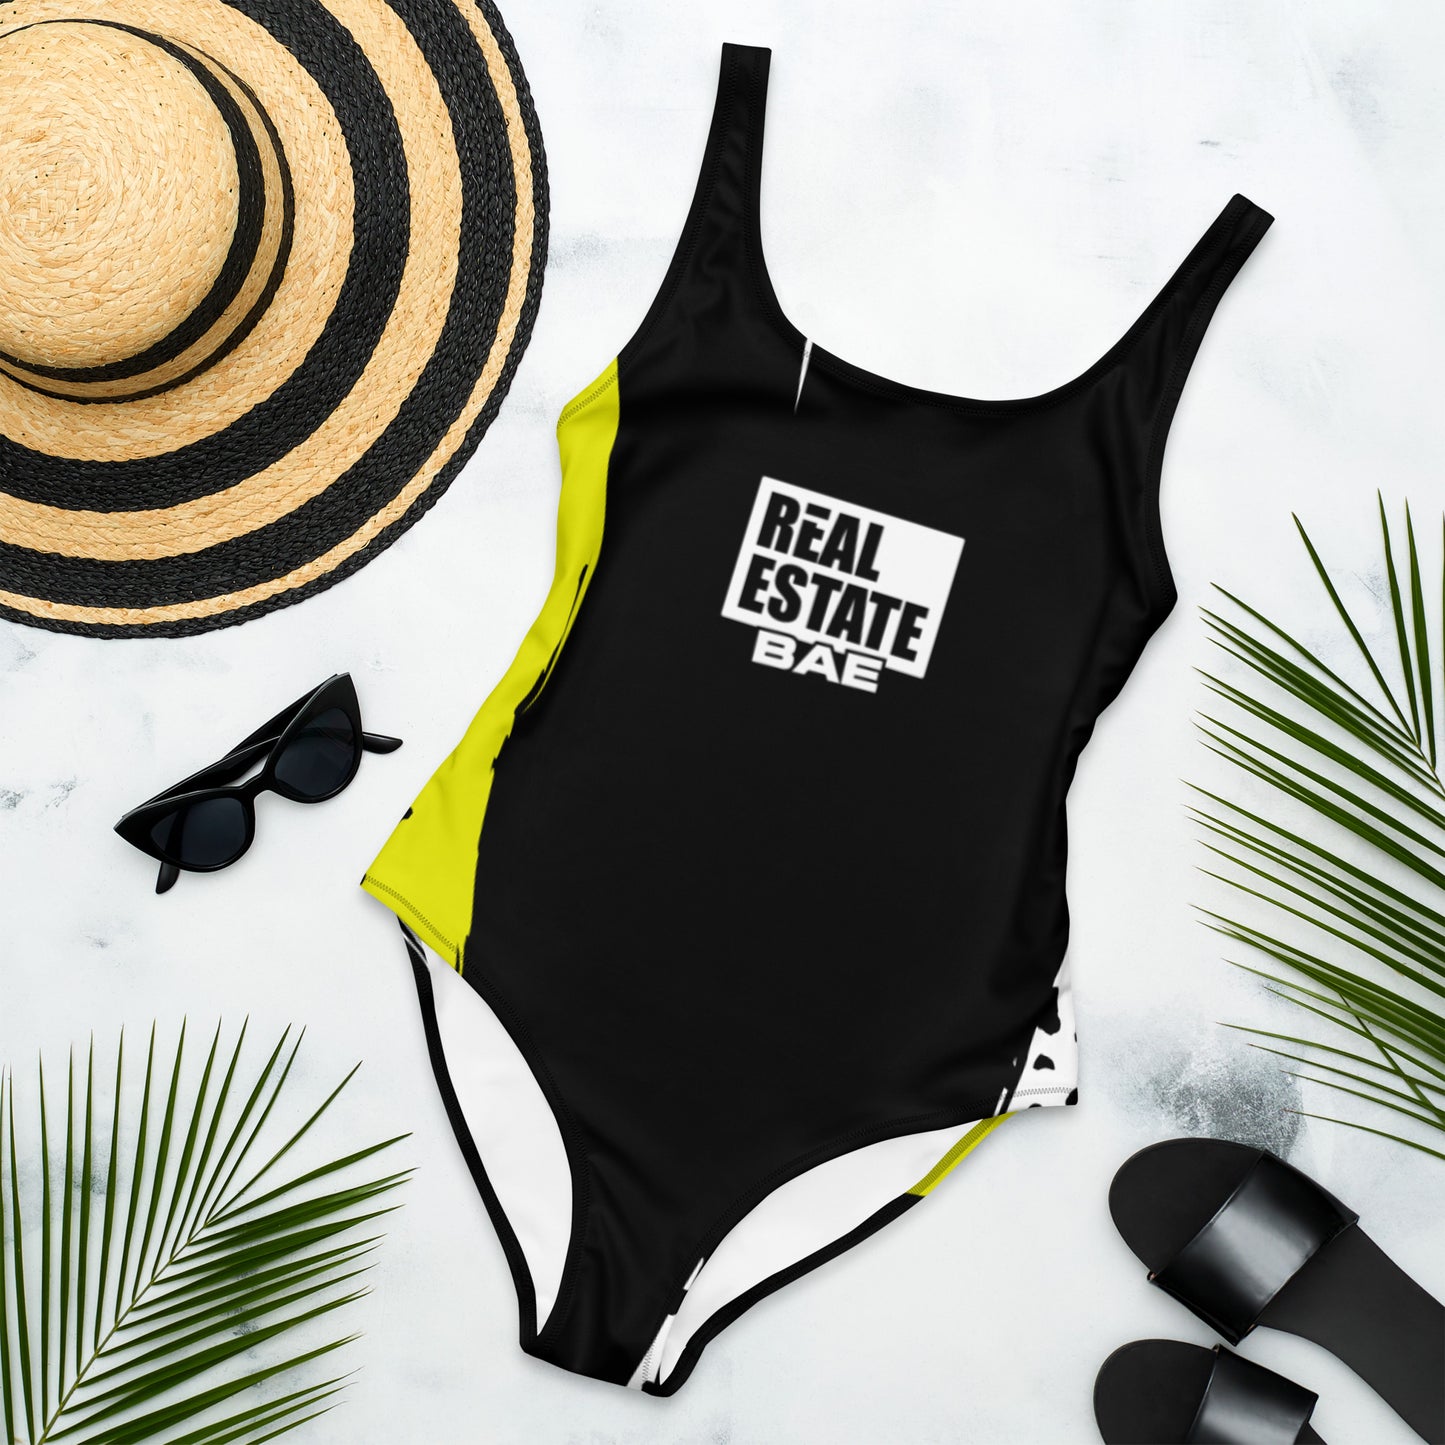 Real Estate Bae™ - BaeWatch Swimsuit